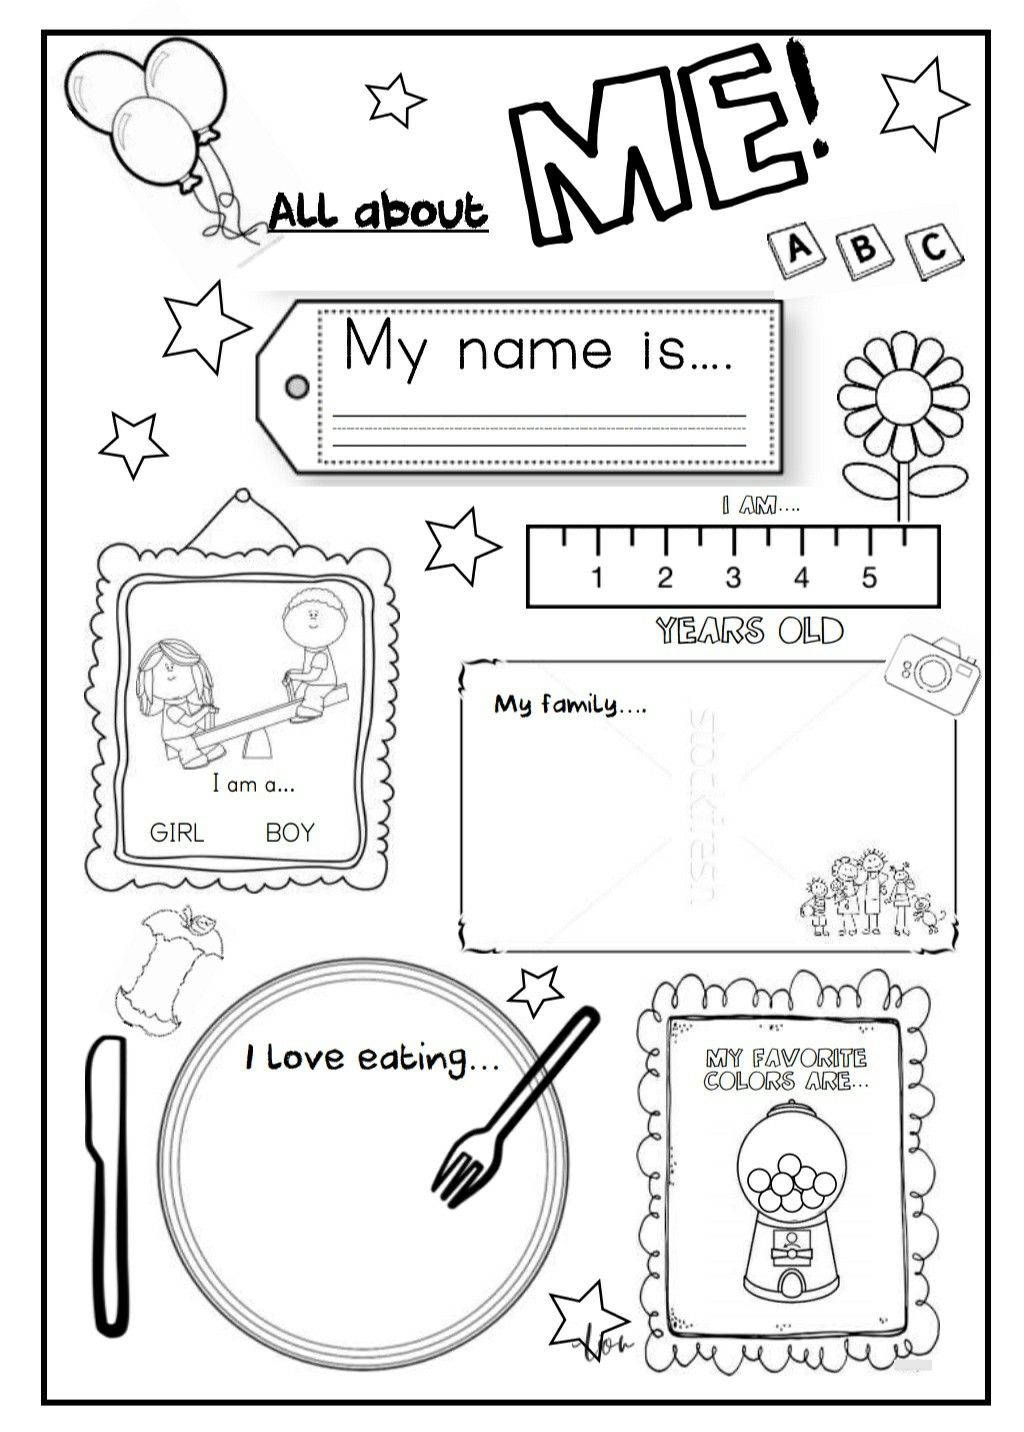 All About Me In Numbers Worksheet All About Me Worksheets